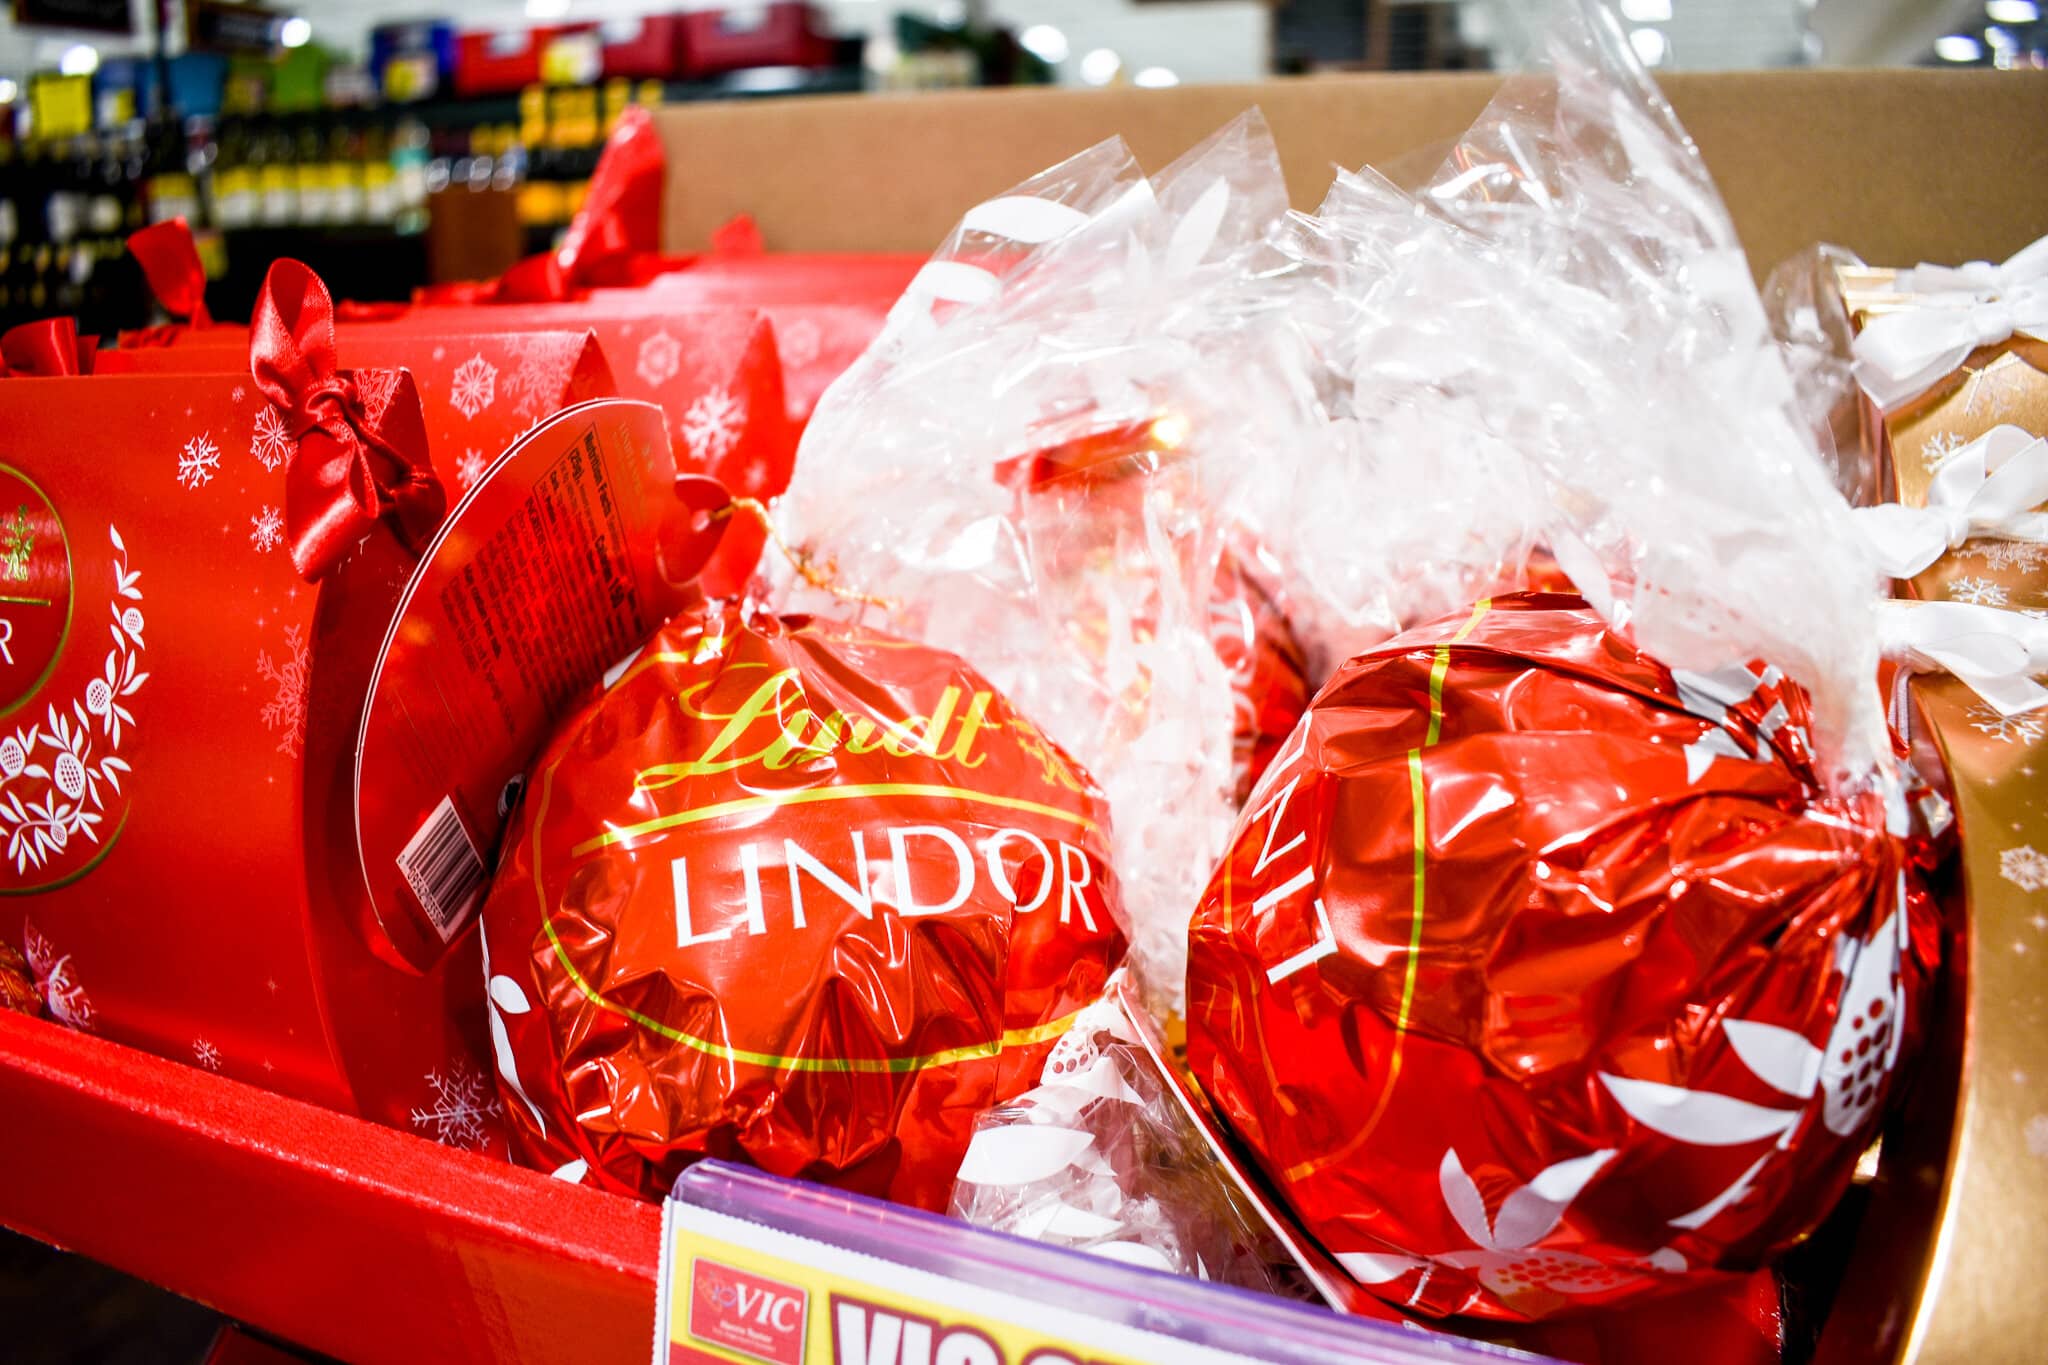 Get your chocolate-loving family member a huge Lindt chocolate ball and they will love you forever.